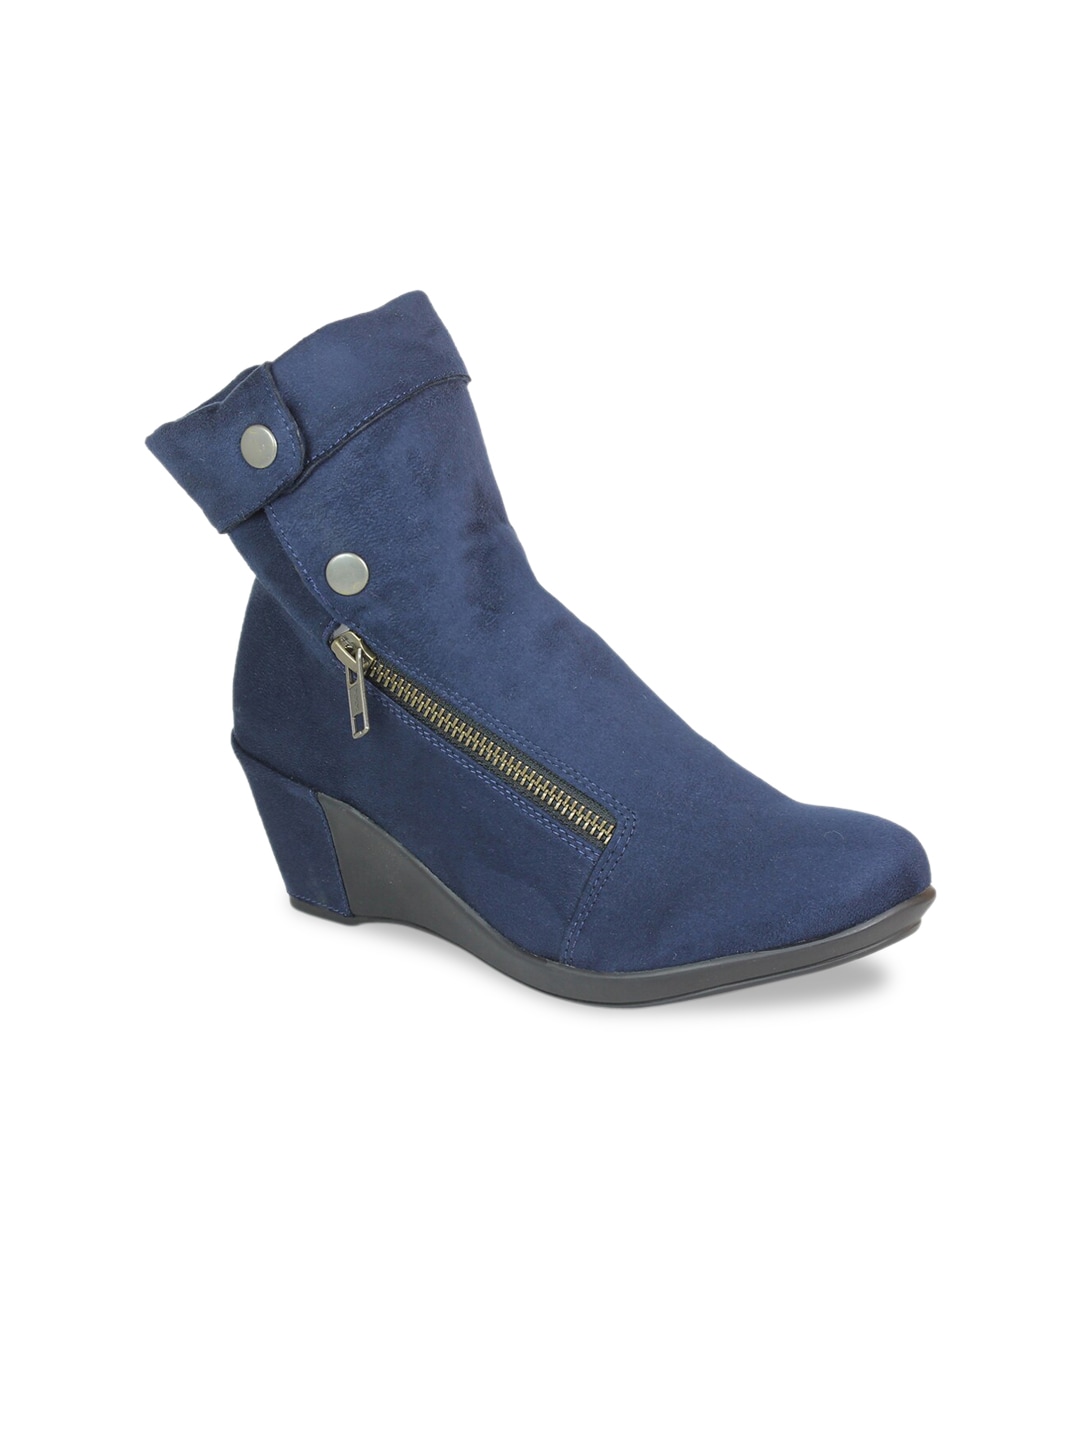 Inc 5 Women Navy Blue Solid Wedge Heeled Boots Price in India